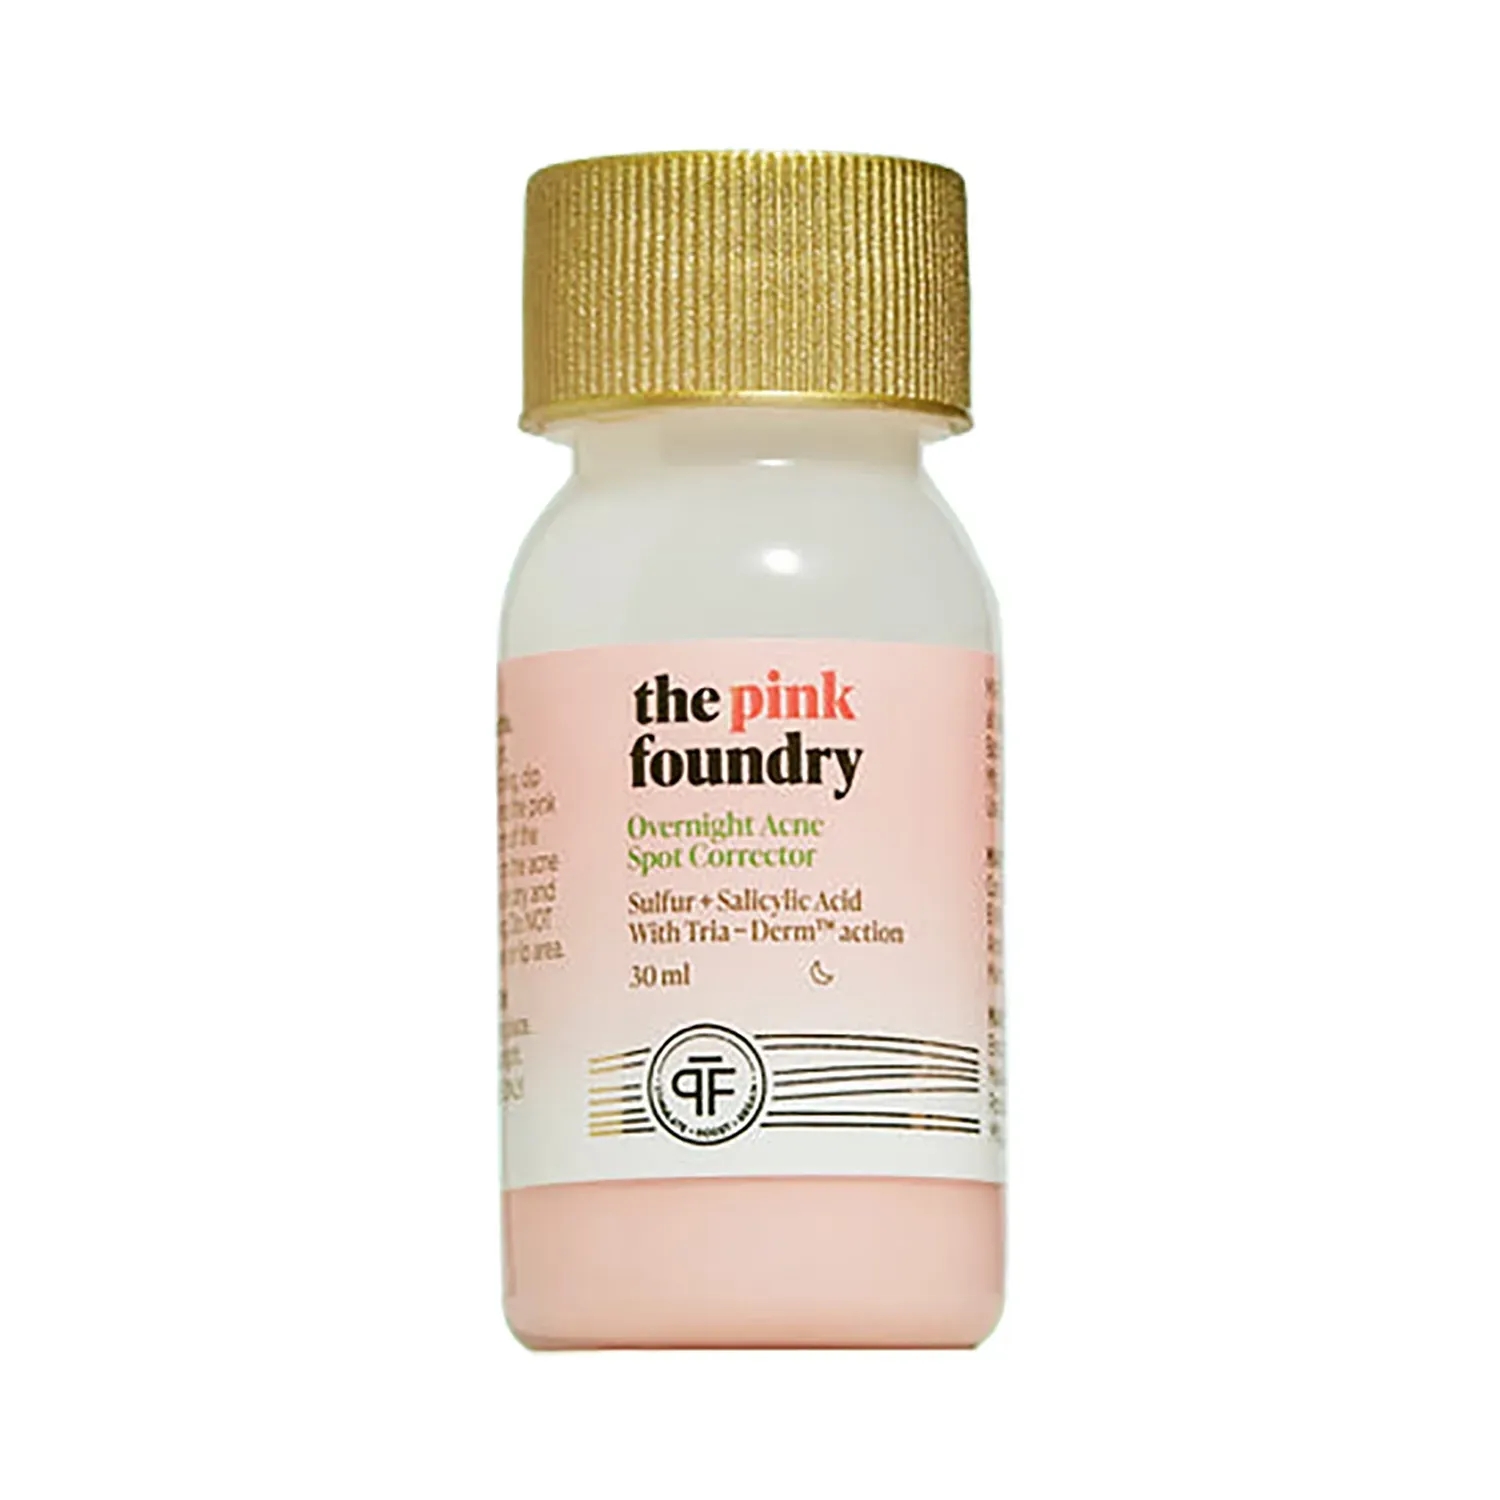 The Pink Foundry | The Pink Foundry Overnight Acne Spot Corrector (15ml)